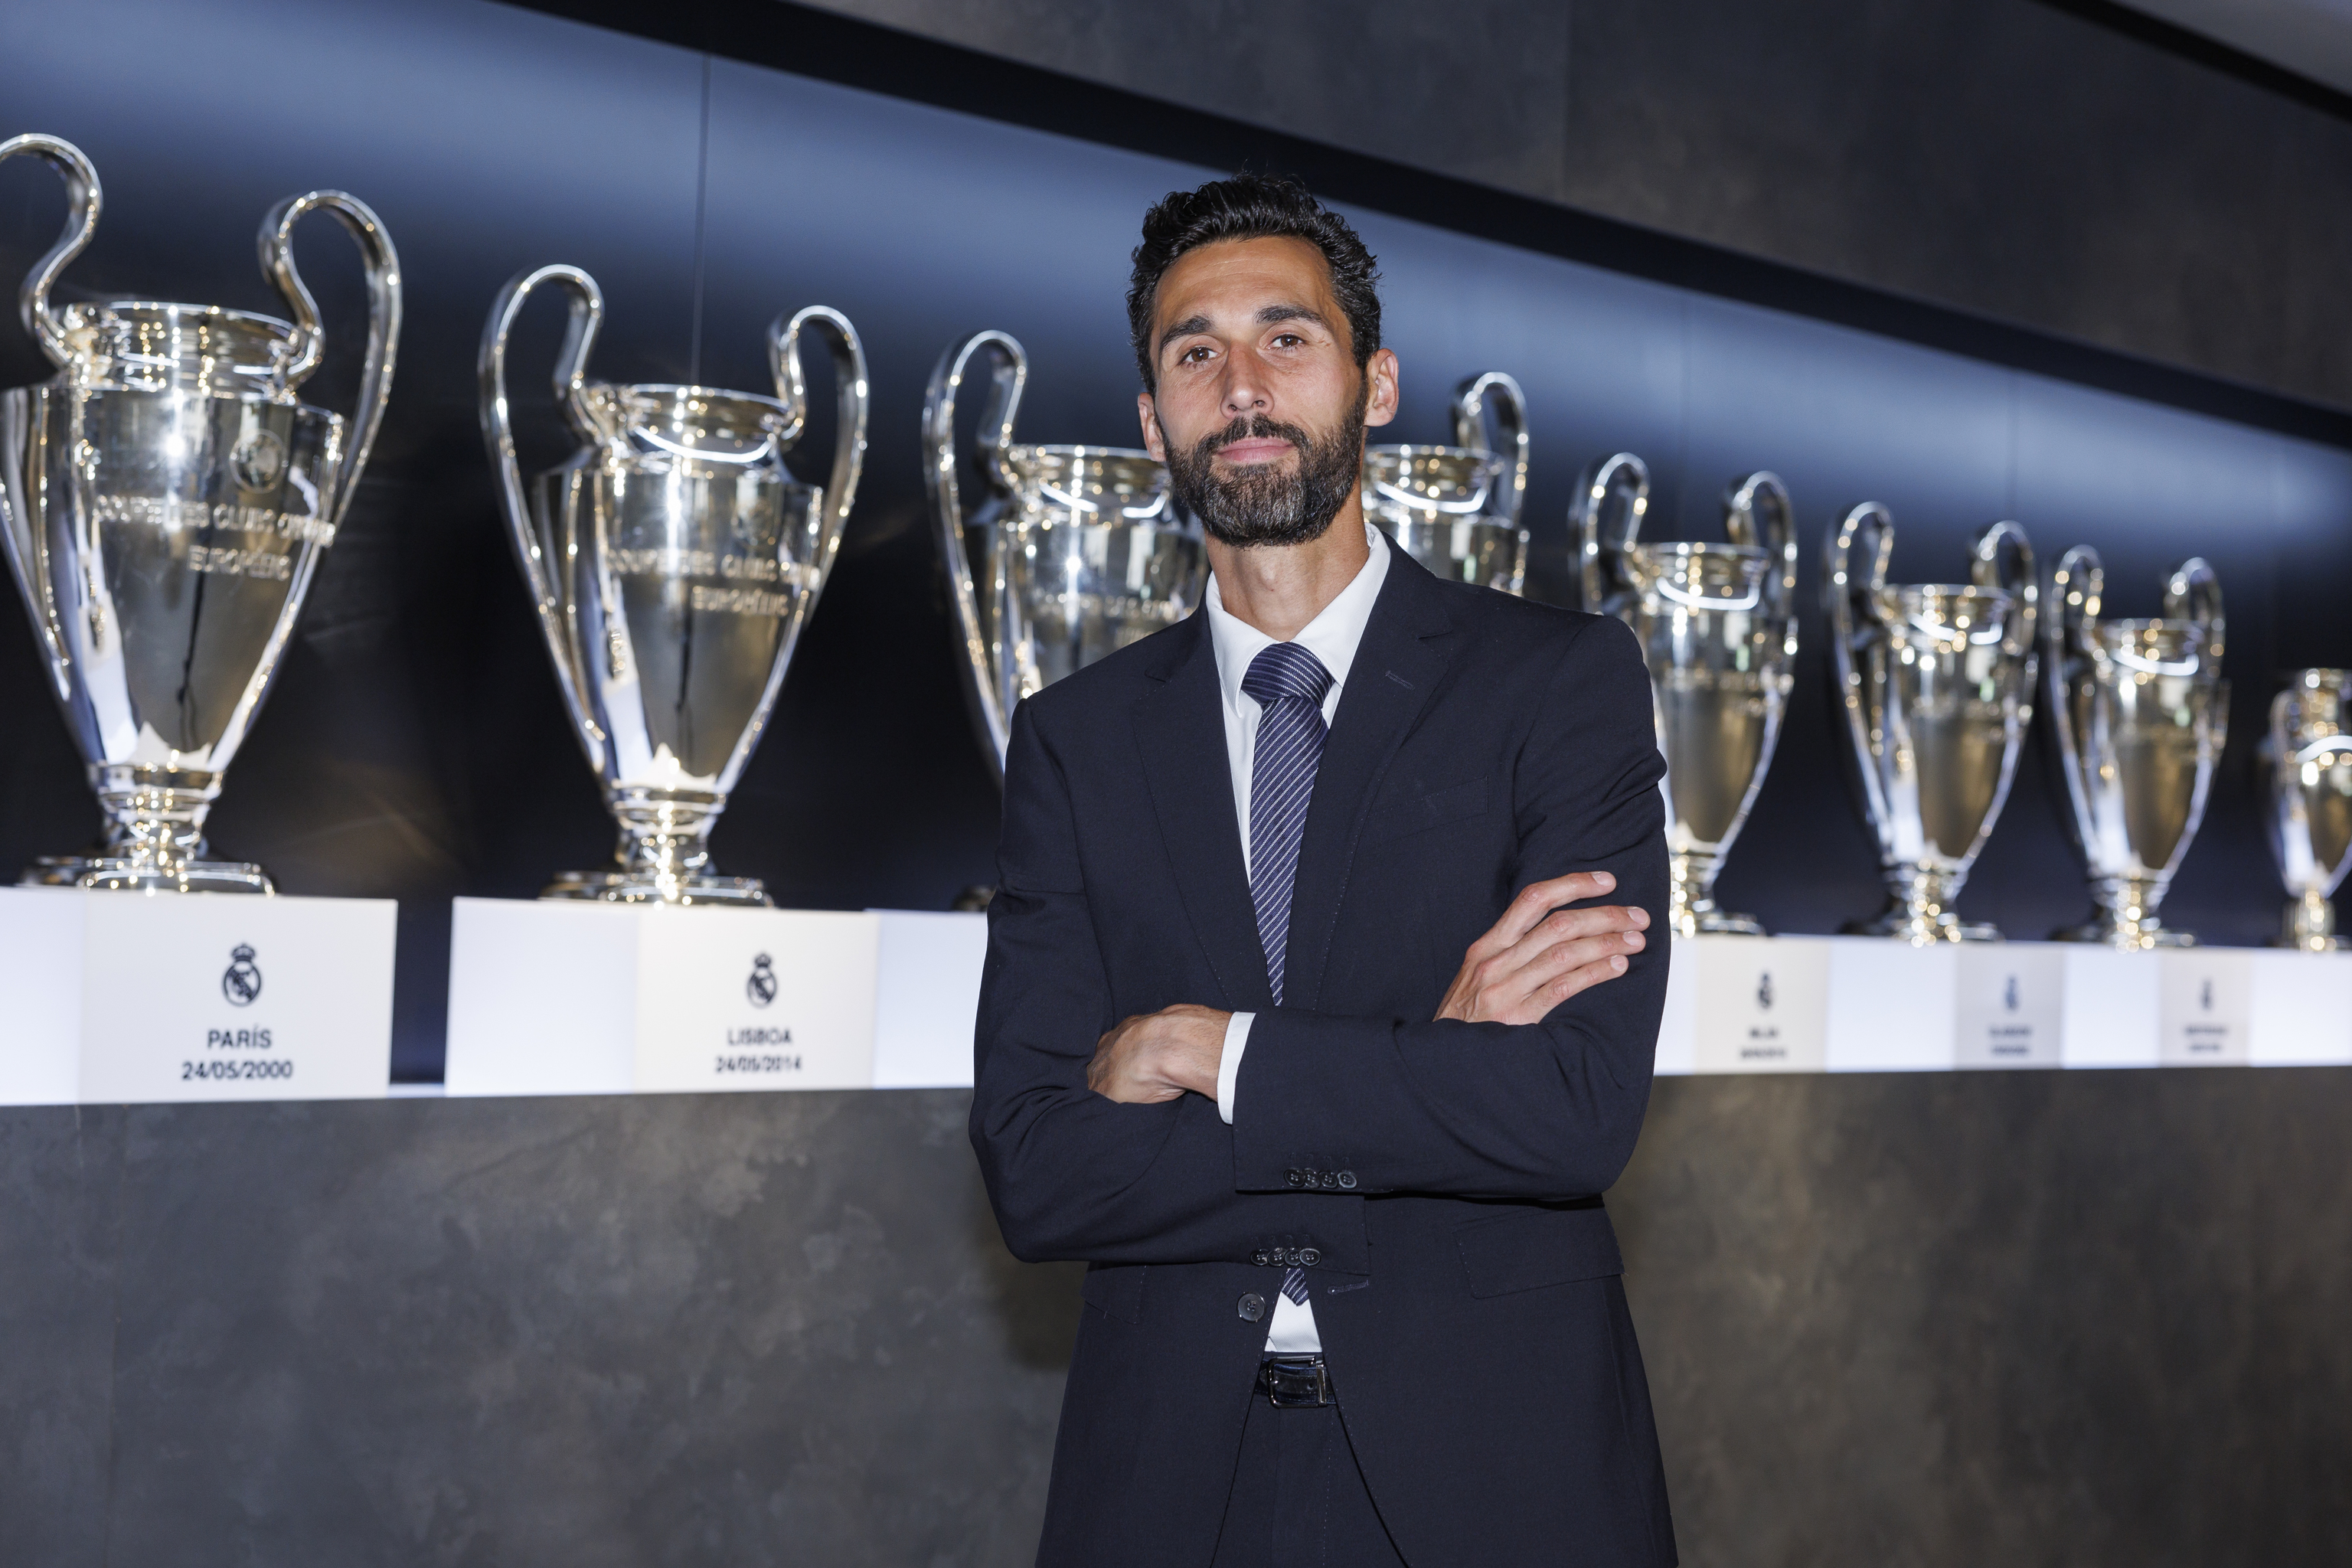 In the club's trophy room, ahead of the 13th European Cup.